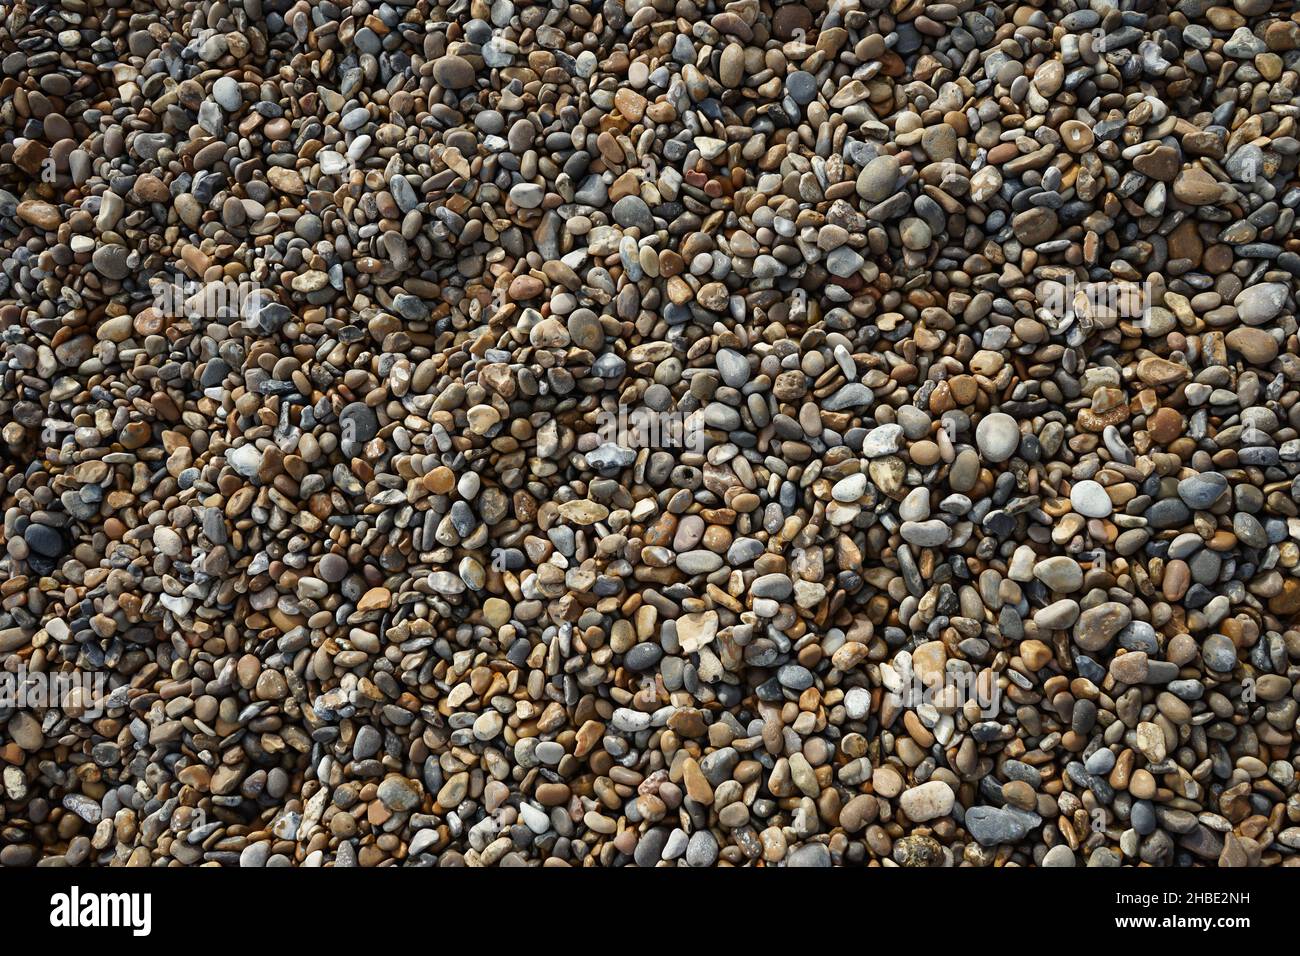 Looking down at an area of pebbles on a beach Stock Photo